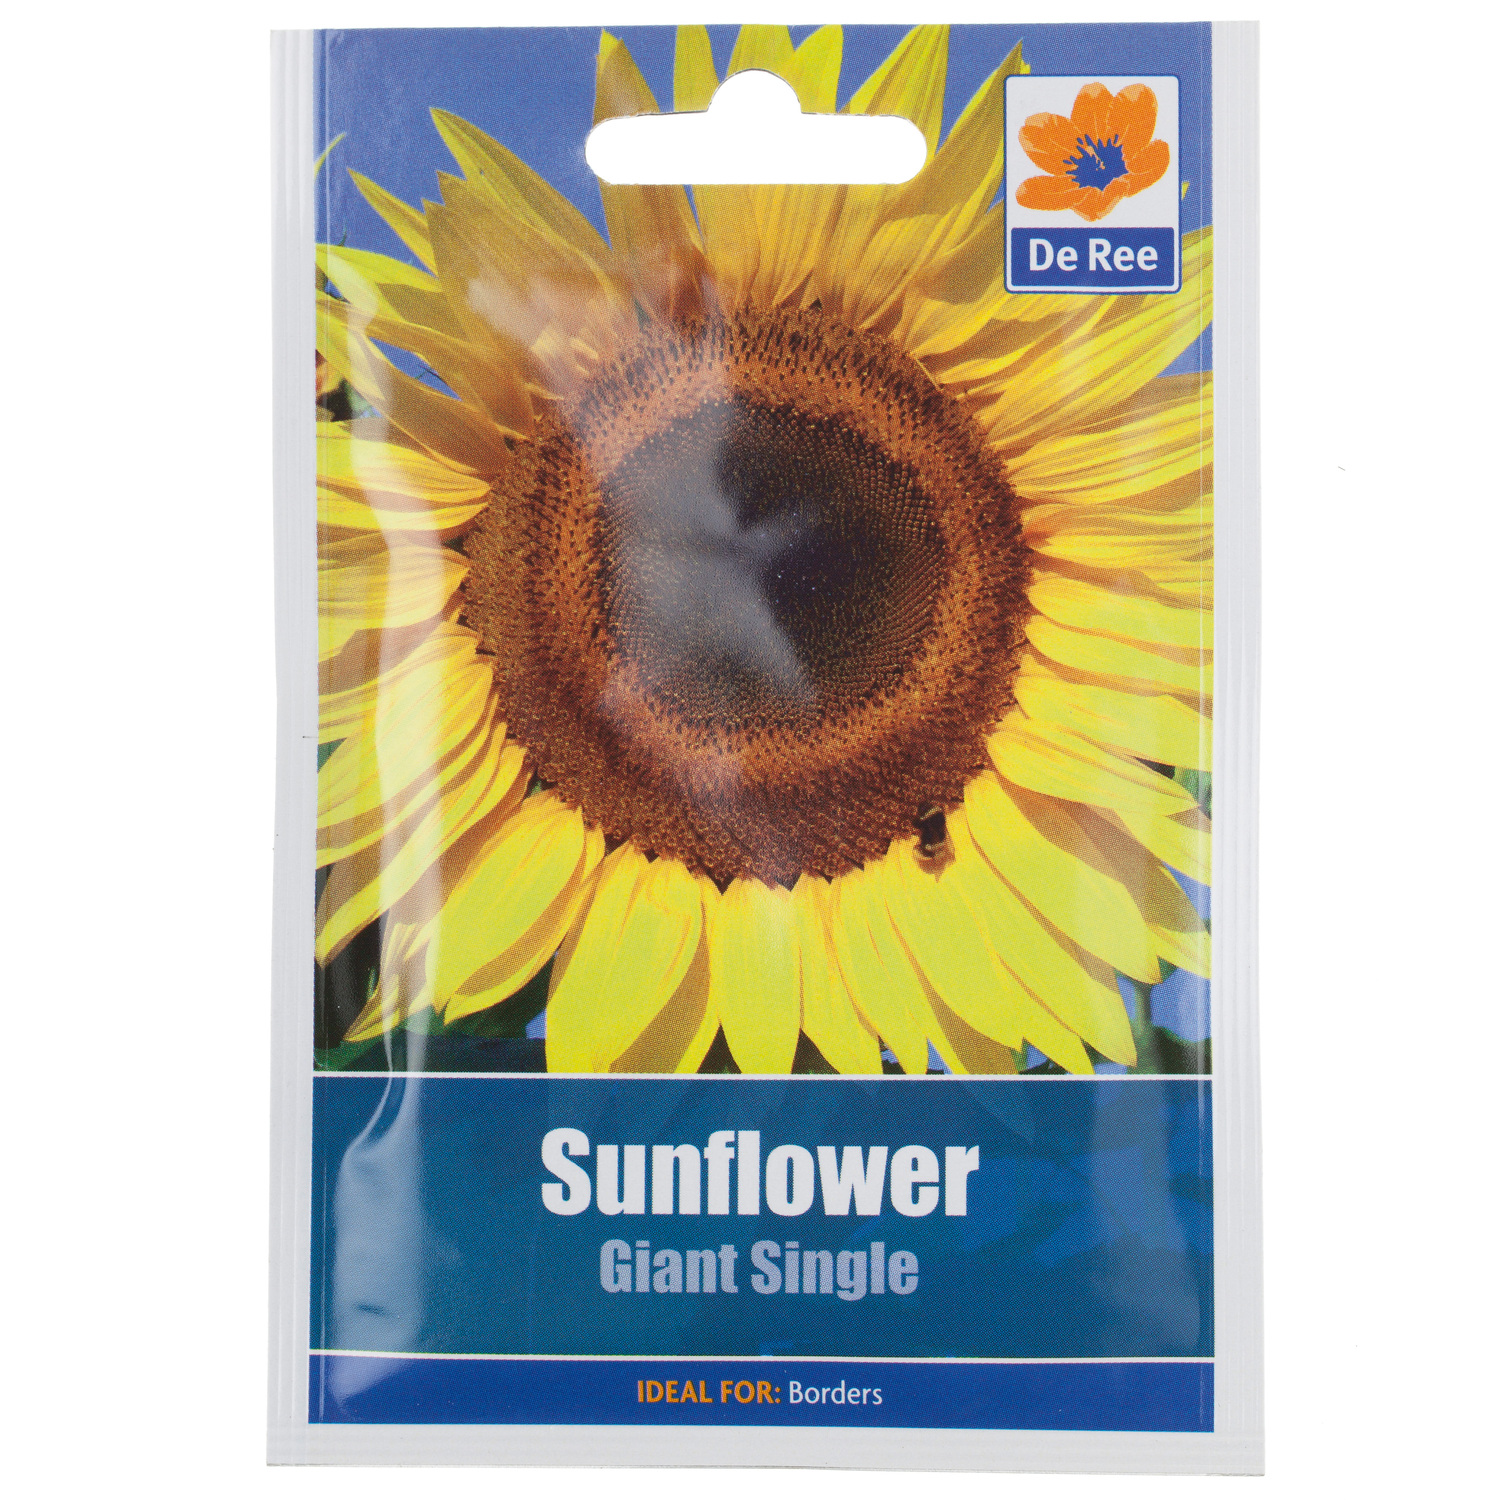 Sunflower Giant Single Seed Packet Image